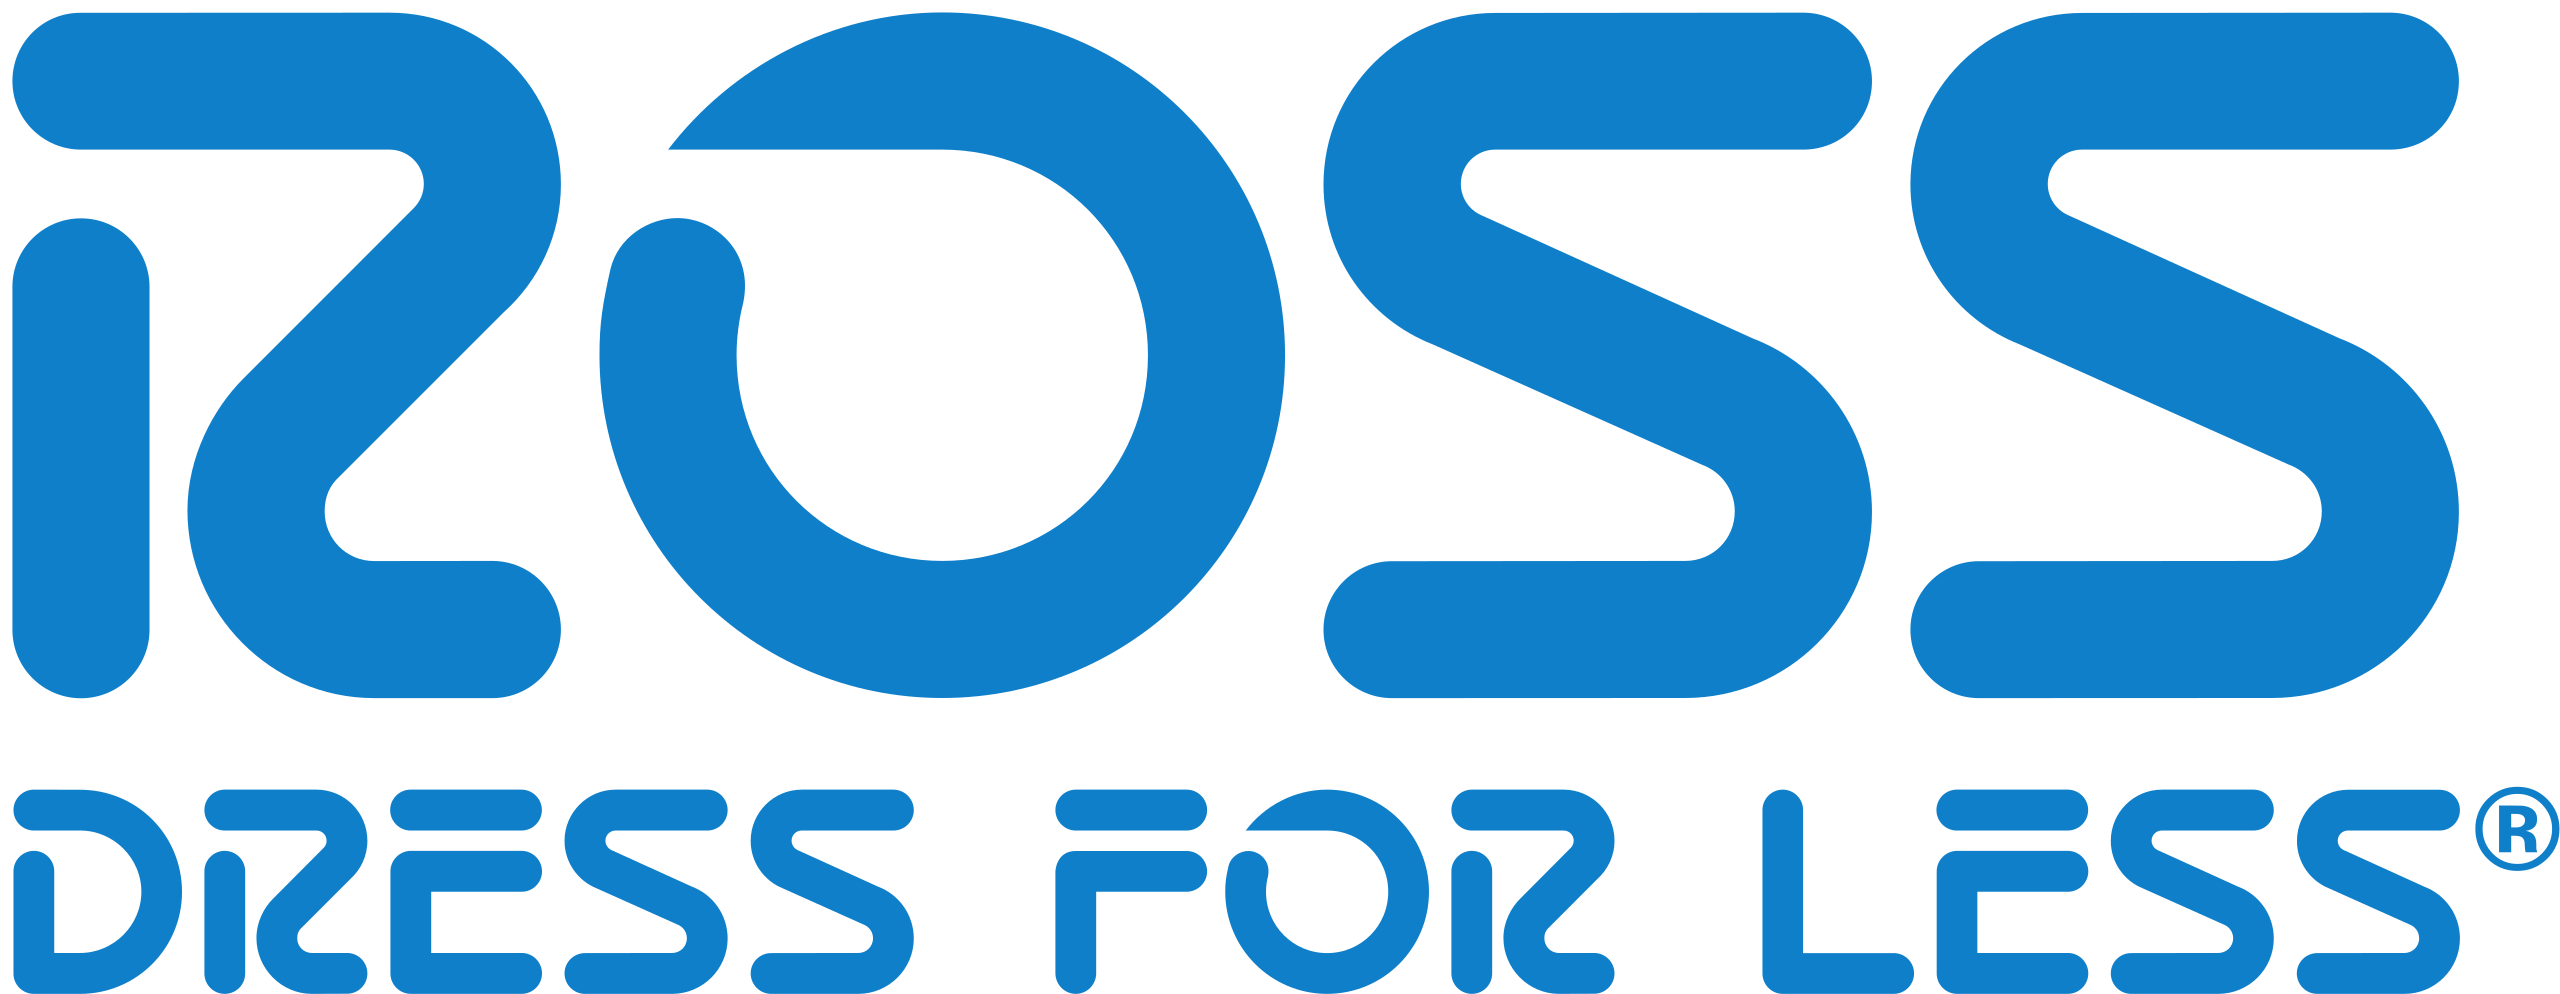 2560px-Ross Stores logo.svg